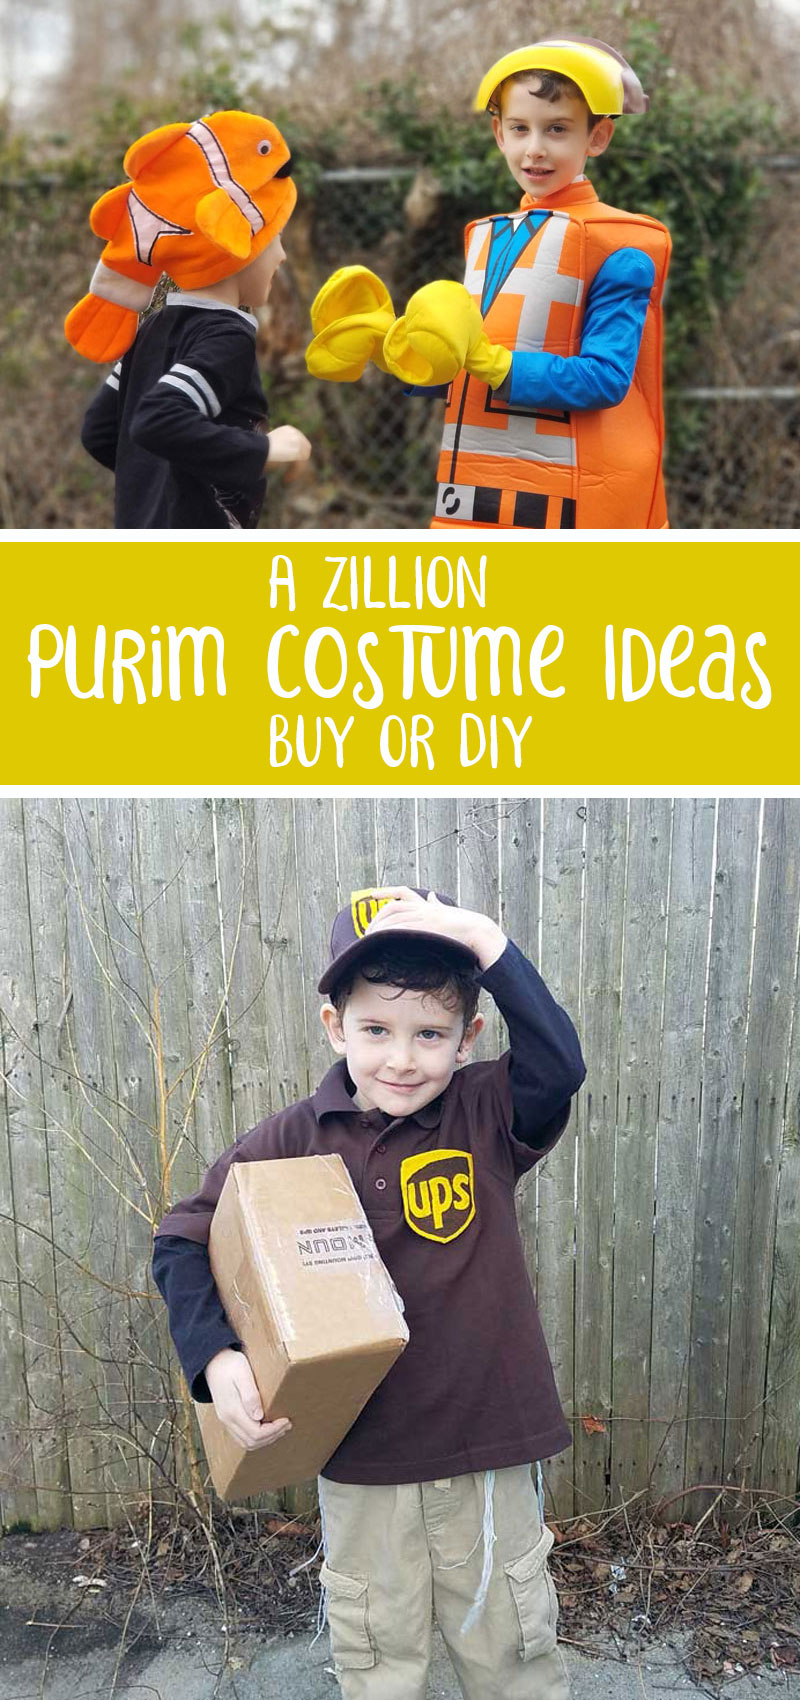 costume ideas for Purim collage with UPS costume and siblings